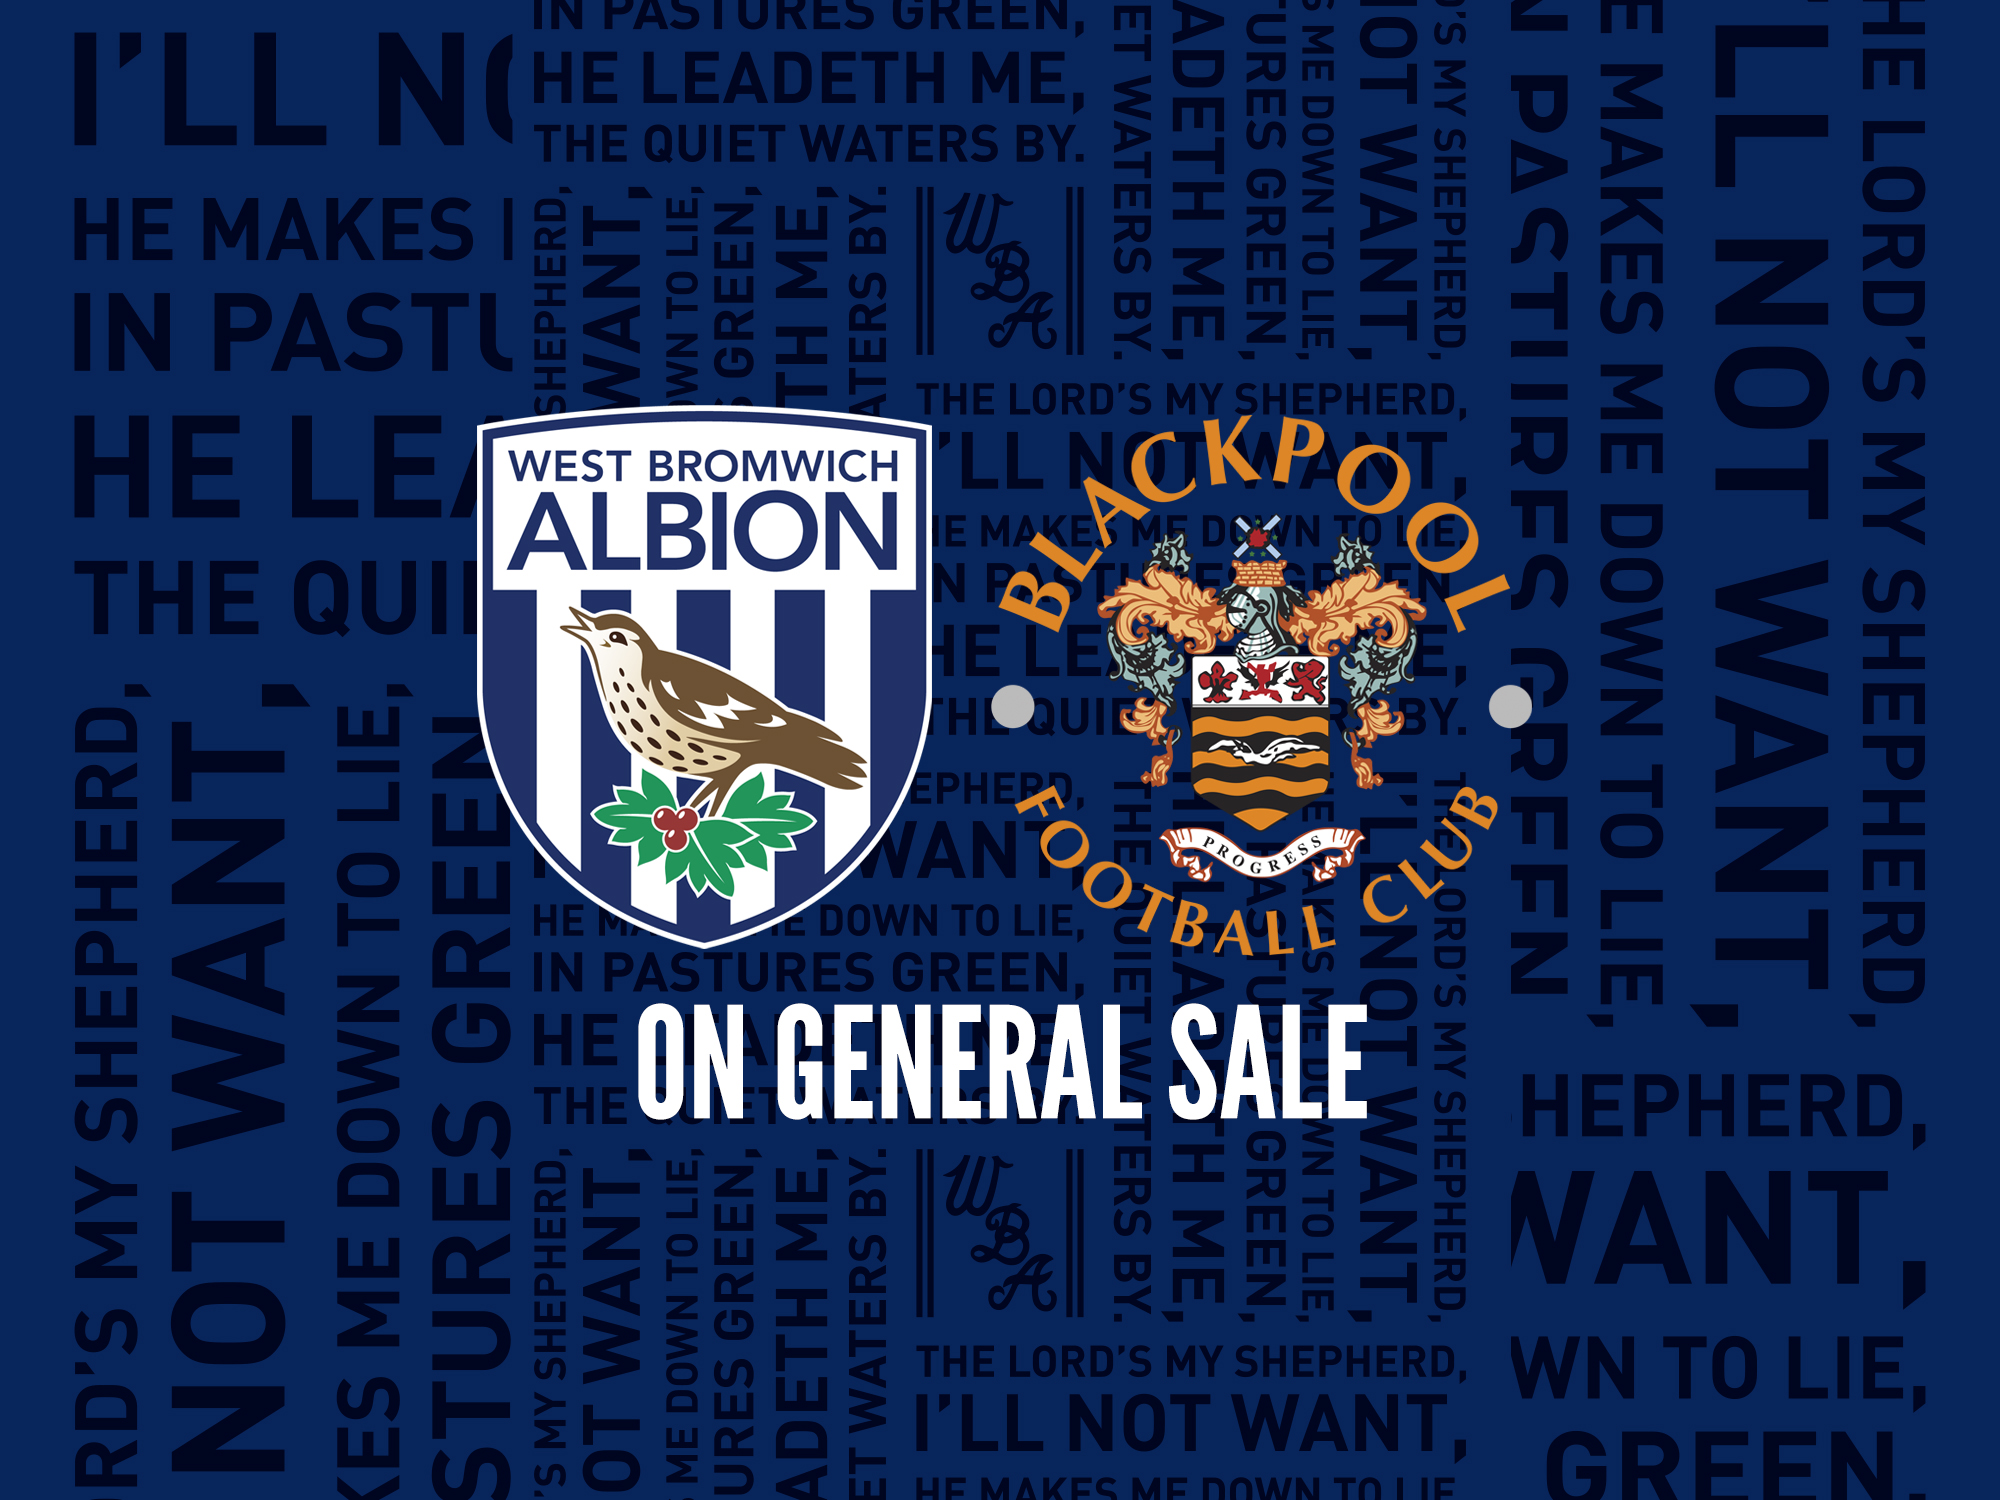 Tickets are on general sale for Albion's Sky Bet Championship fixture against Blackpool